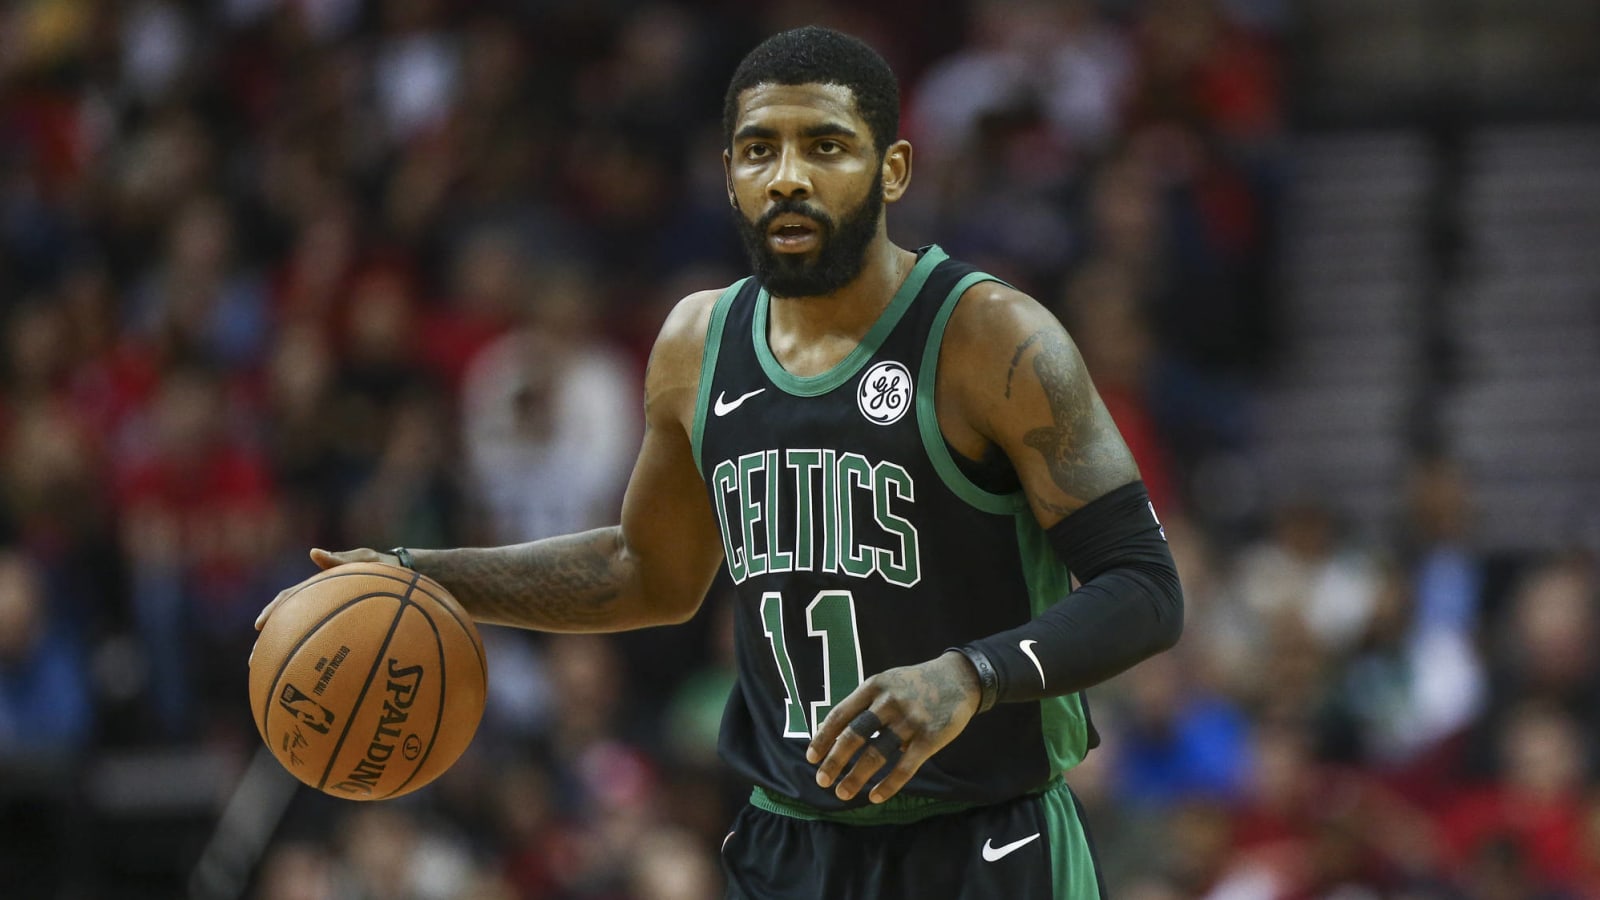 Could Kyrie Irving miss extended time due to scratched cornea?